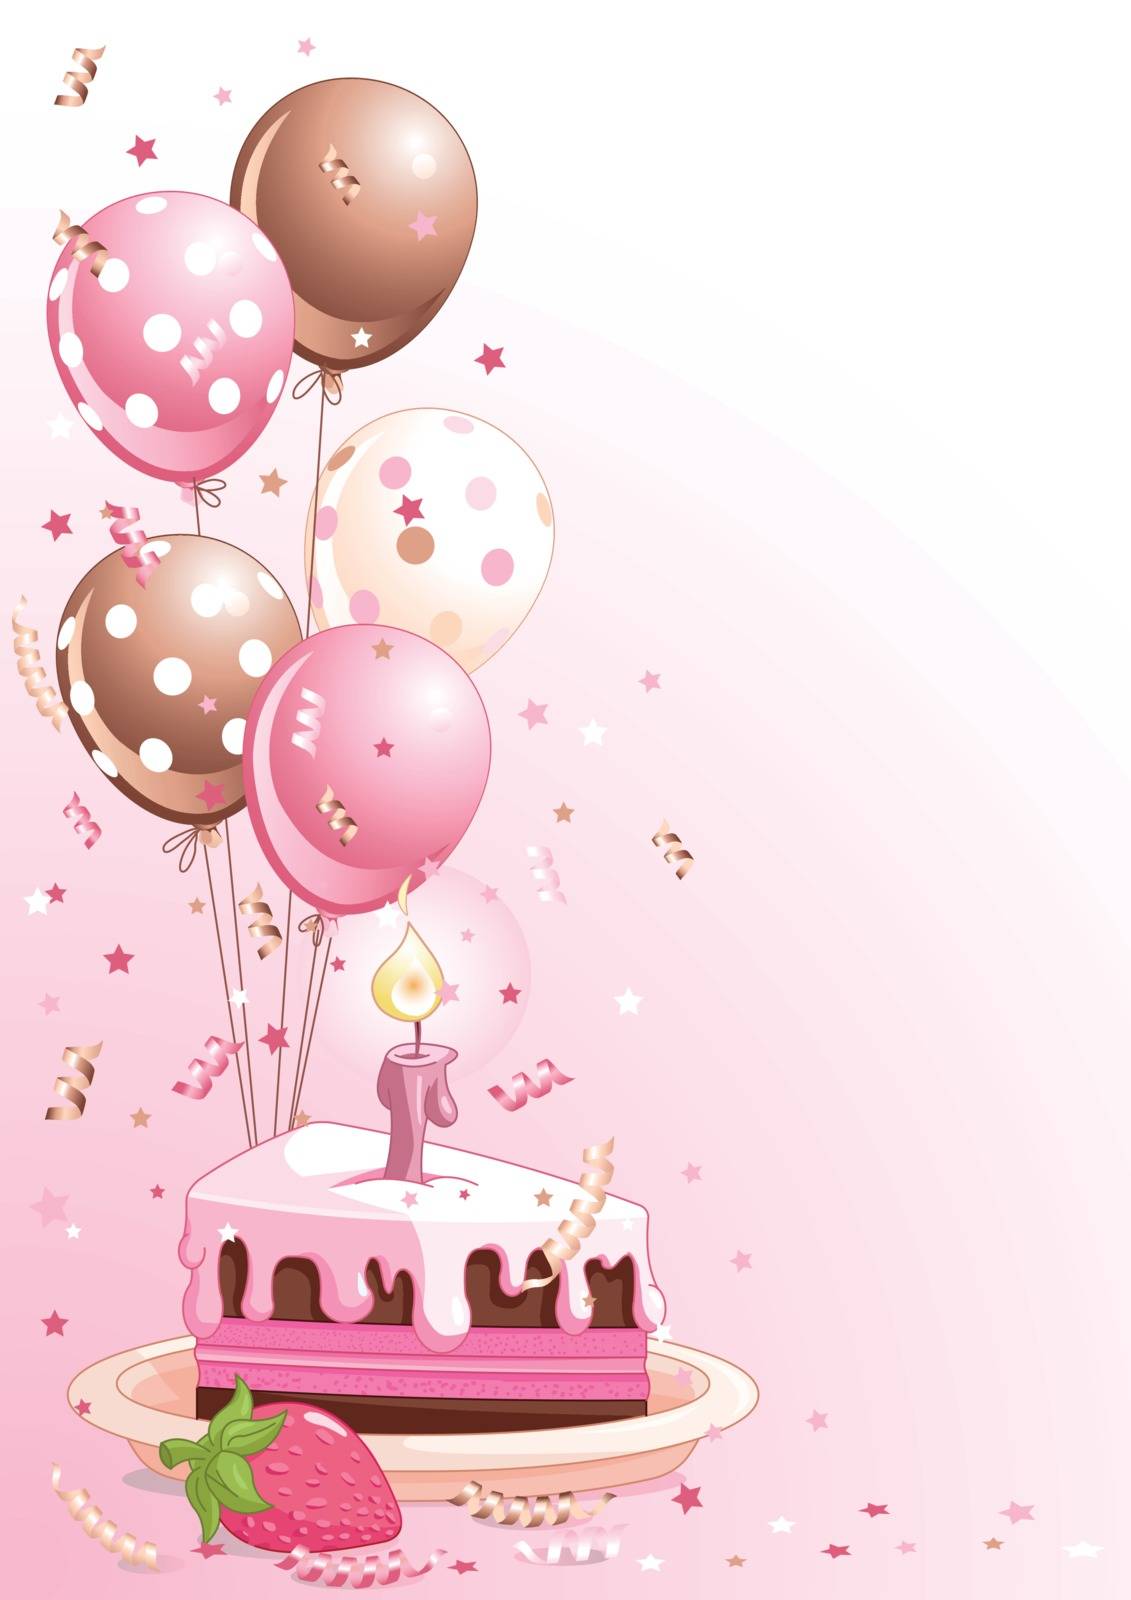 Illustration of a Slice of Birthday Cake with Balloons and Confetti